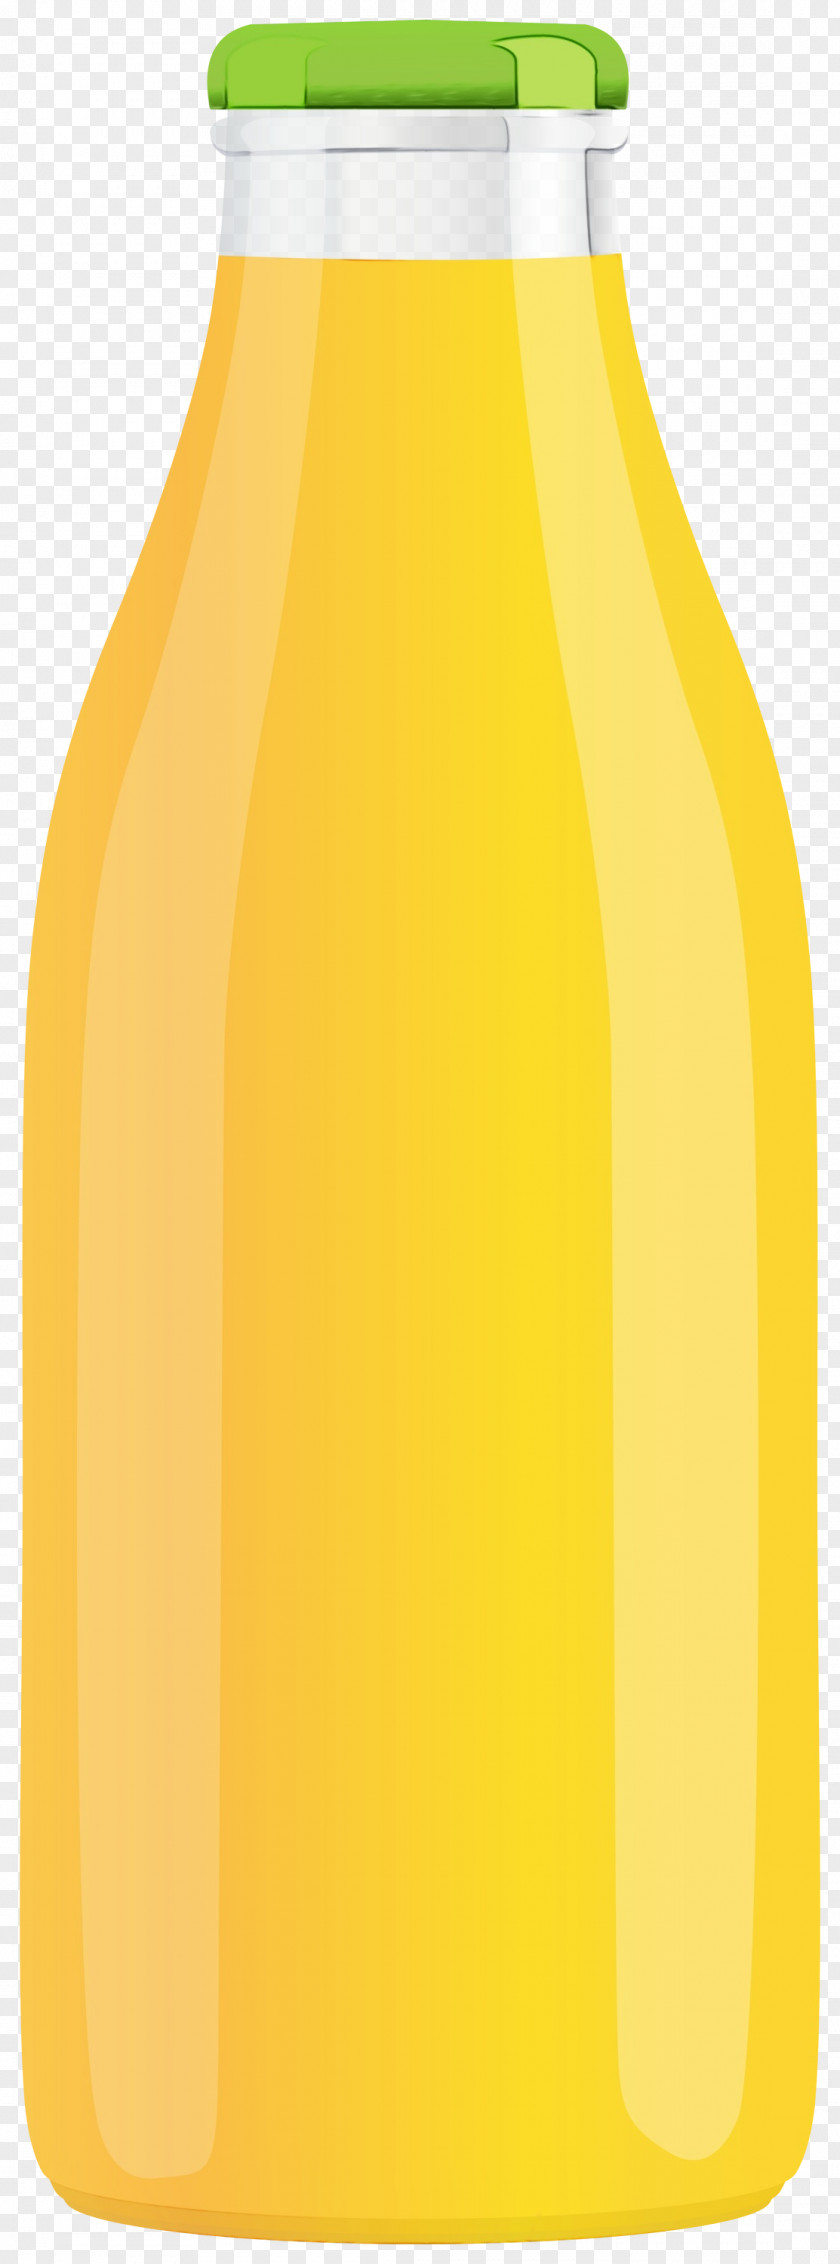 Glass Bottle Yellow Fruit PNG